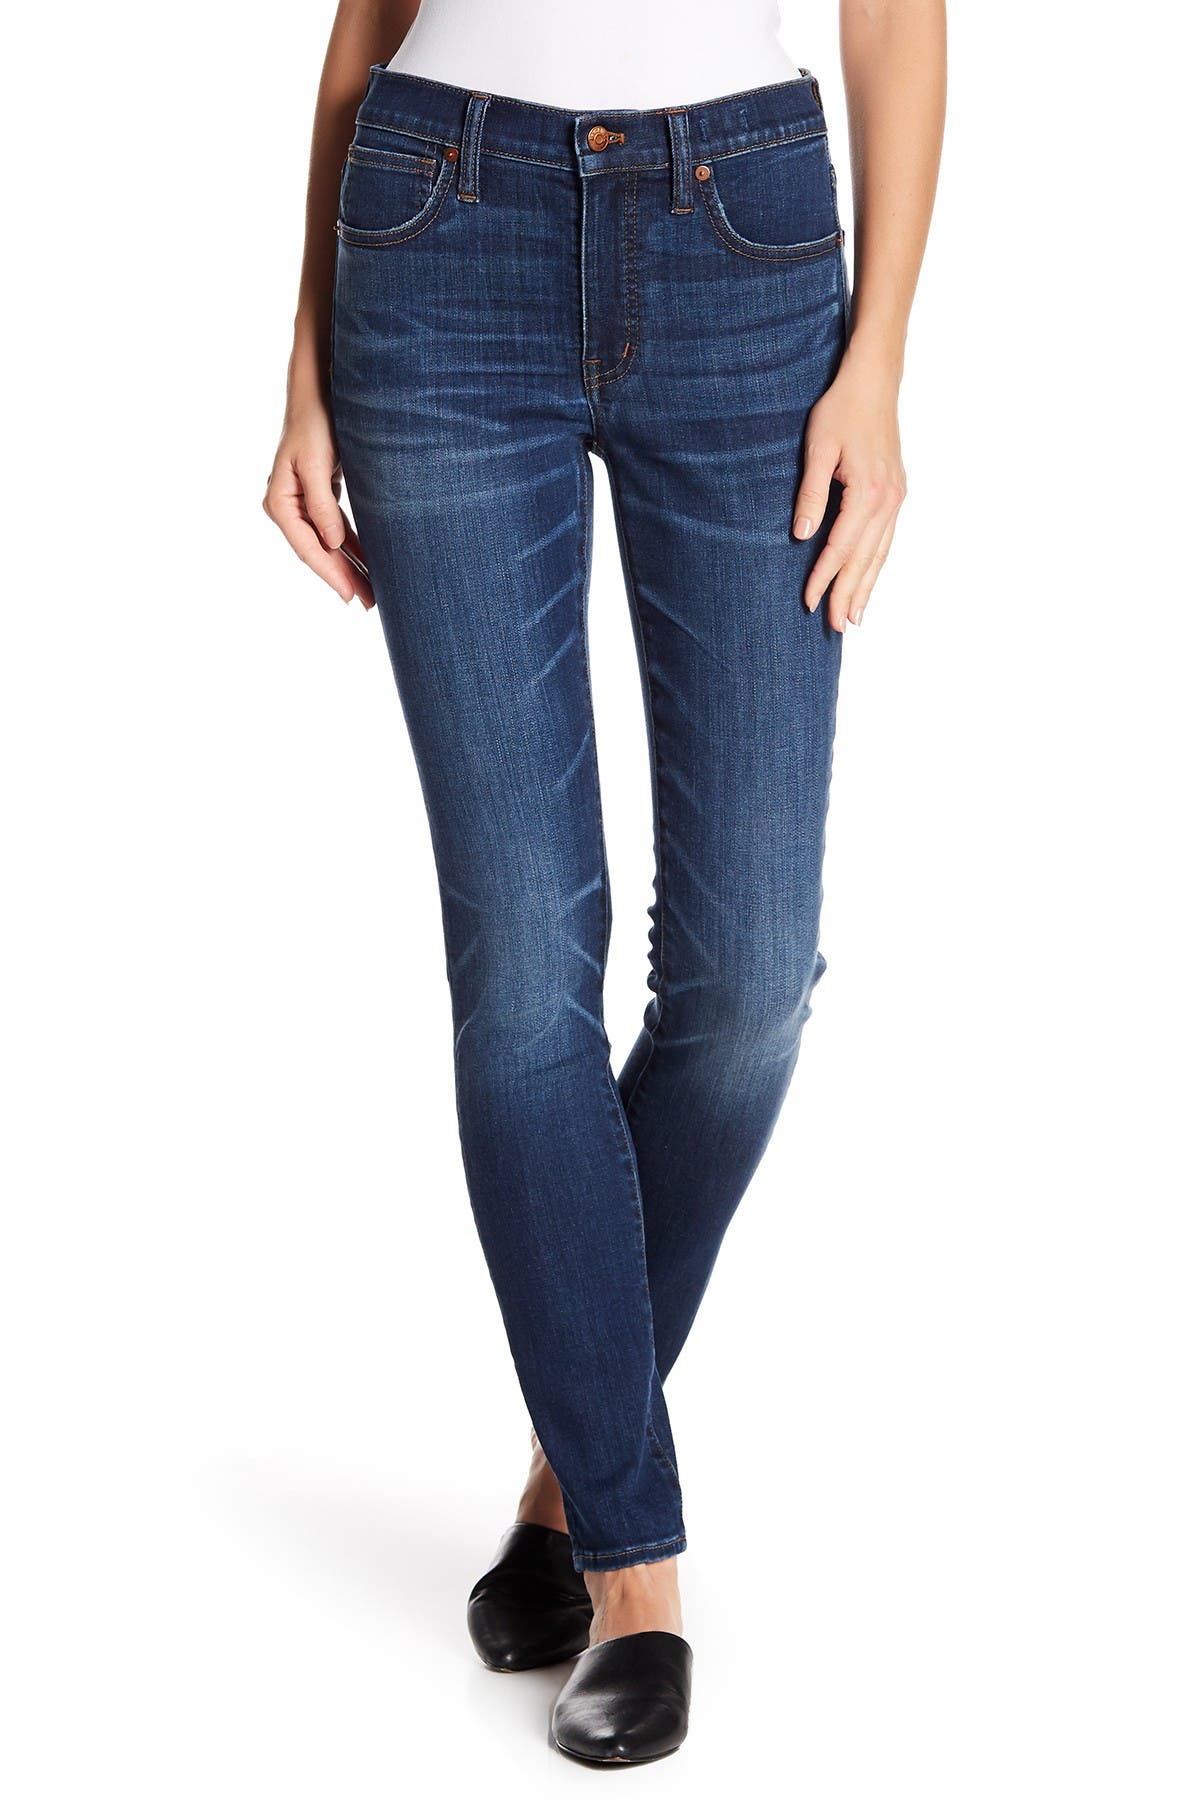 7 for all mankind skinny fit jeans